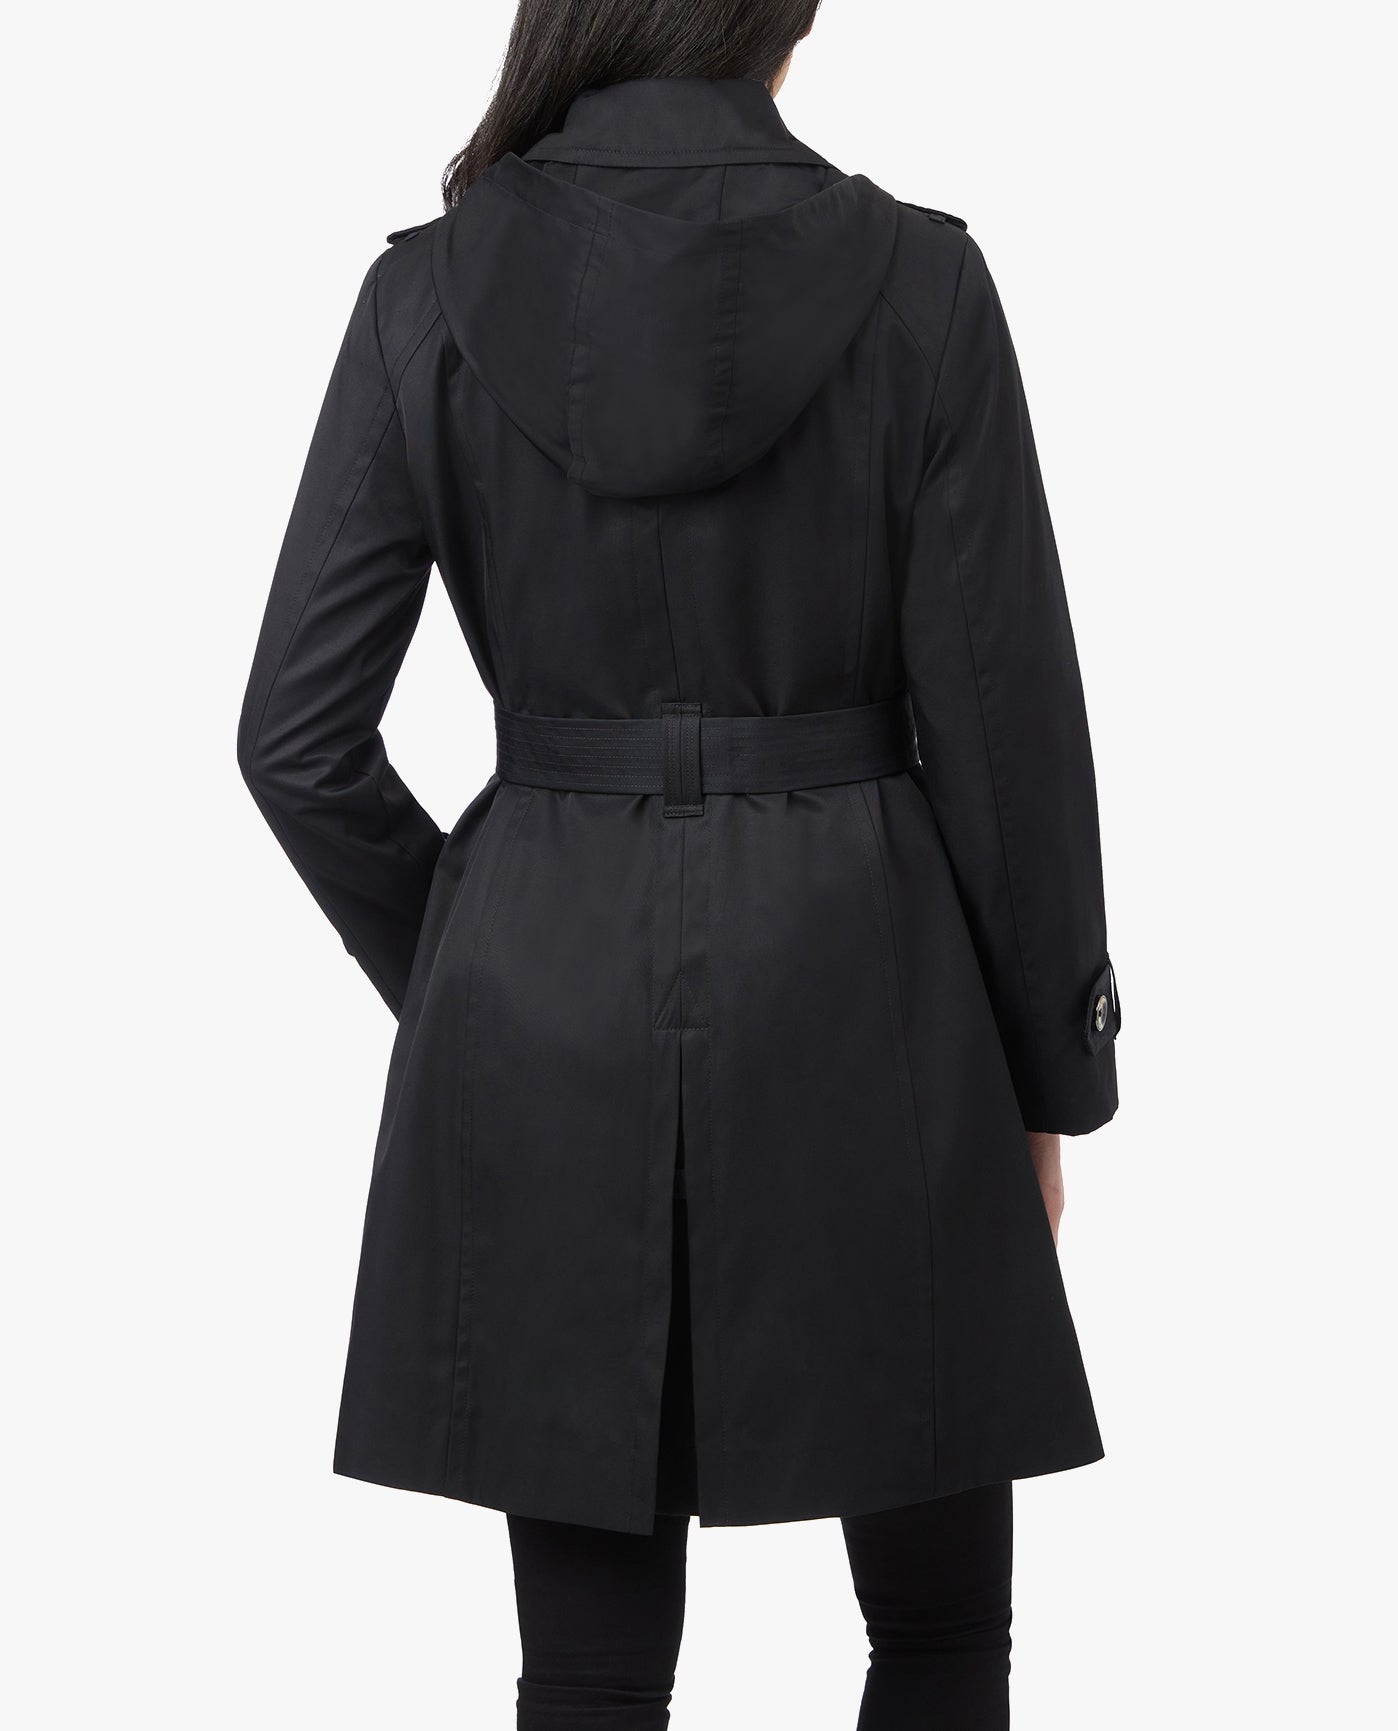 BACK VIEW OF DOUBLE BREASTED HOODED TRENCH COAT WITH WAIST BELT | BLACK